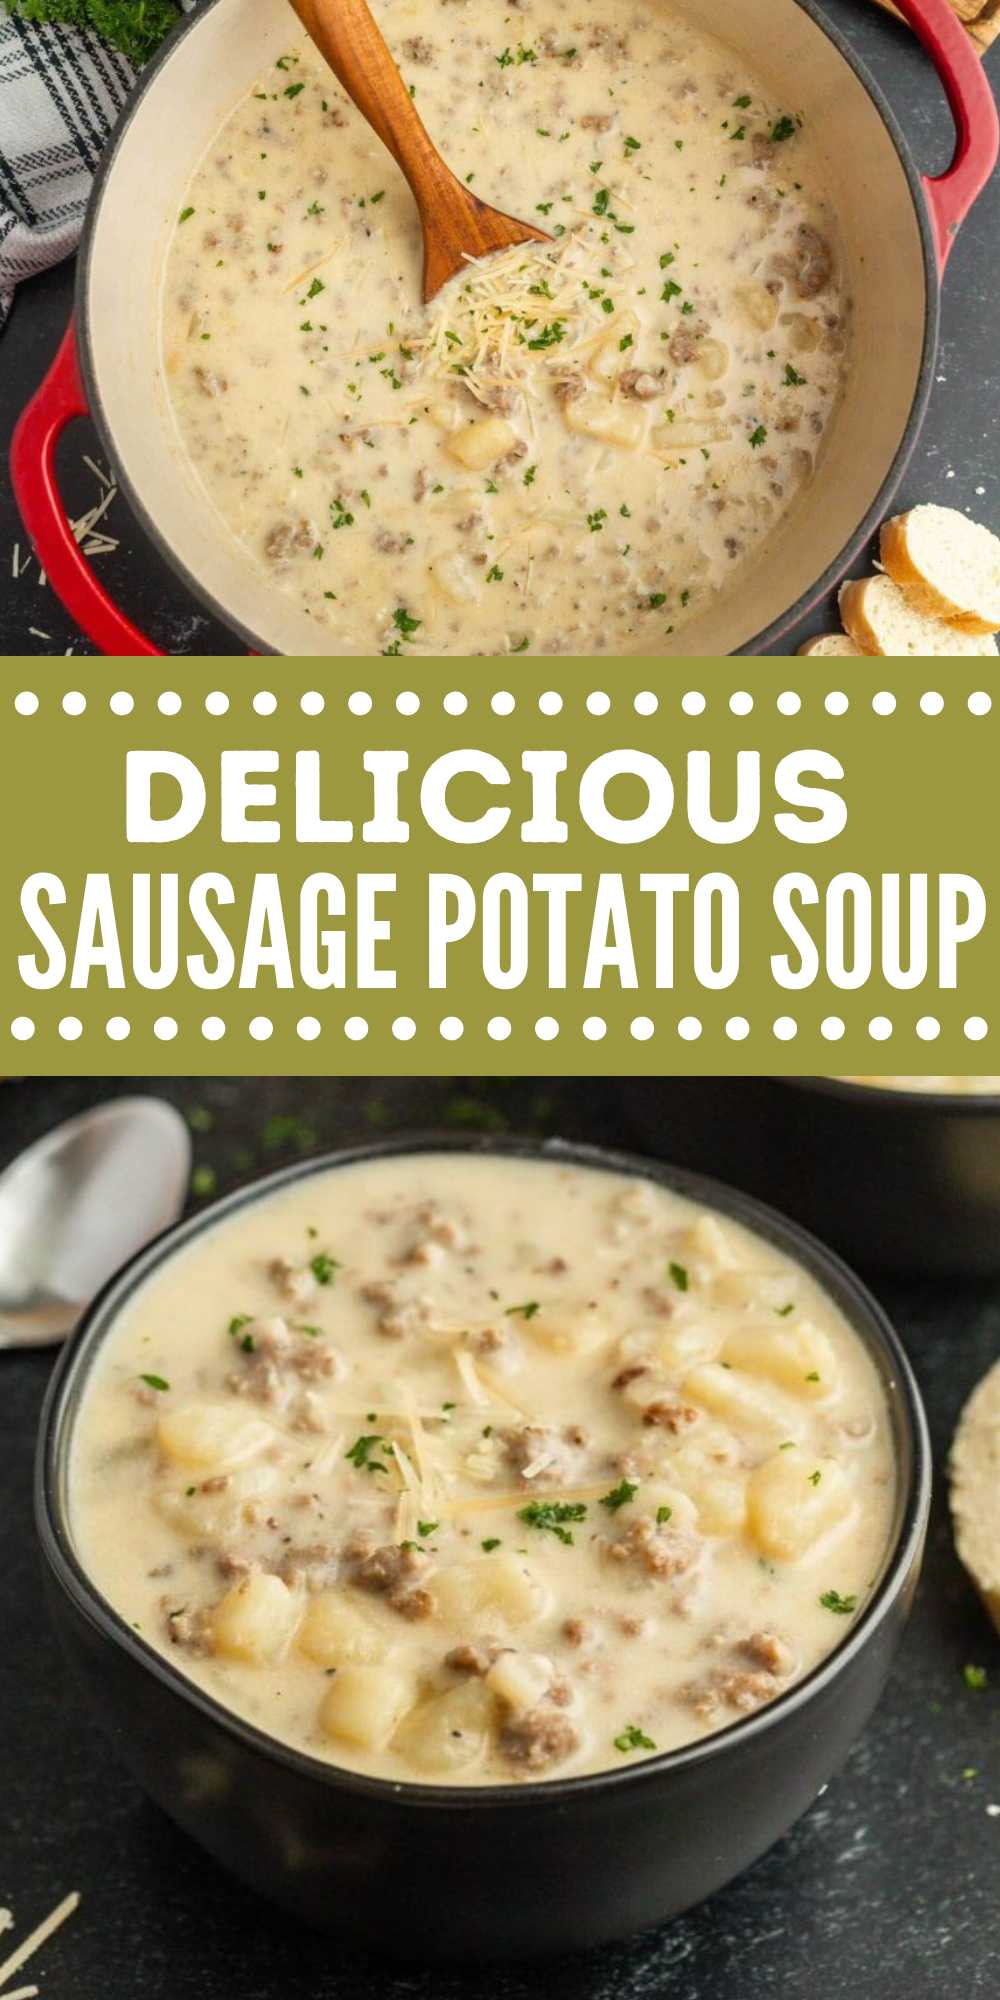 Sausage Potato Soup is hearty, creamy and delicious. The soup is perfect cooked on the stovetop but you can easily cook in your slow cooker. When serving we love to top with cheddar cheese for a delicious and creamy soup. Add some French bread for dipping to make this a complete meal idea. #eatingonadime #sausagepotatosoup #potatosouprecipe